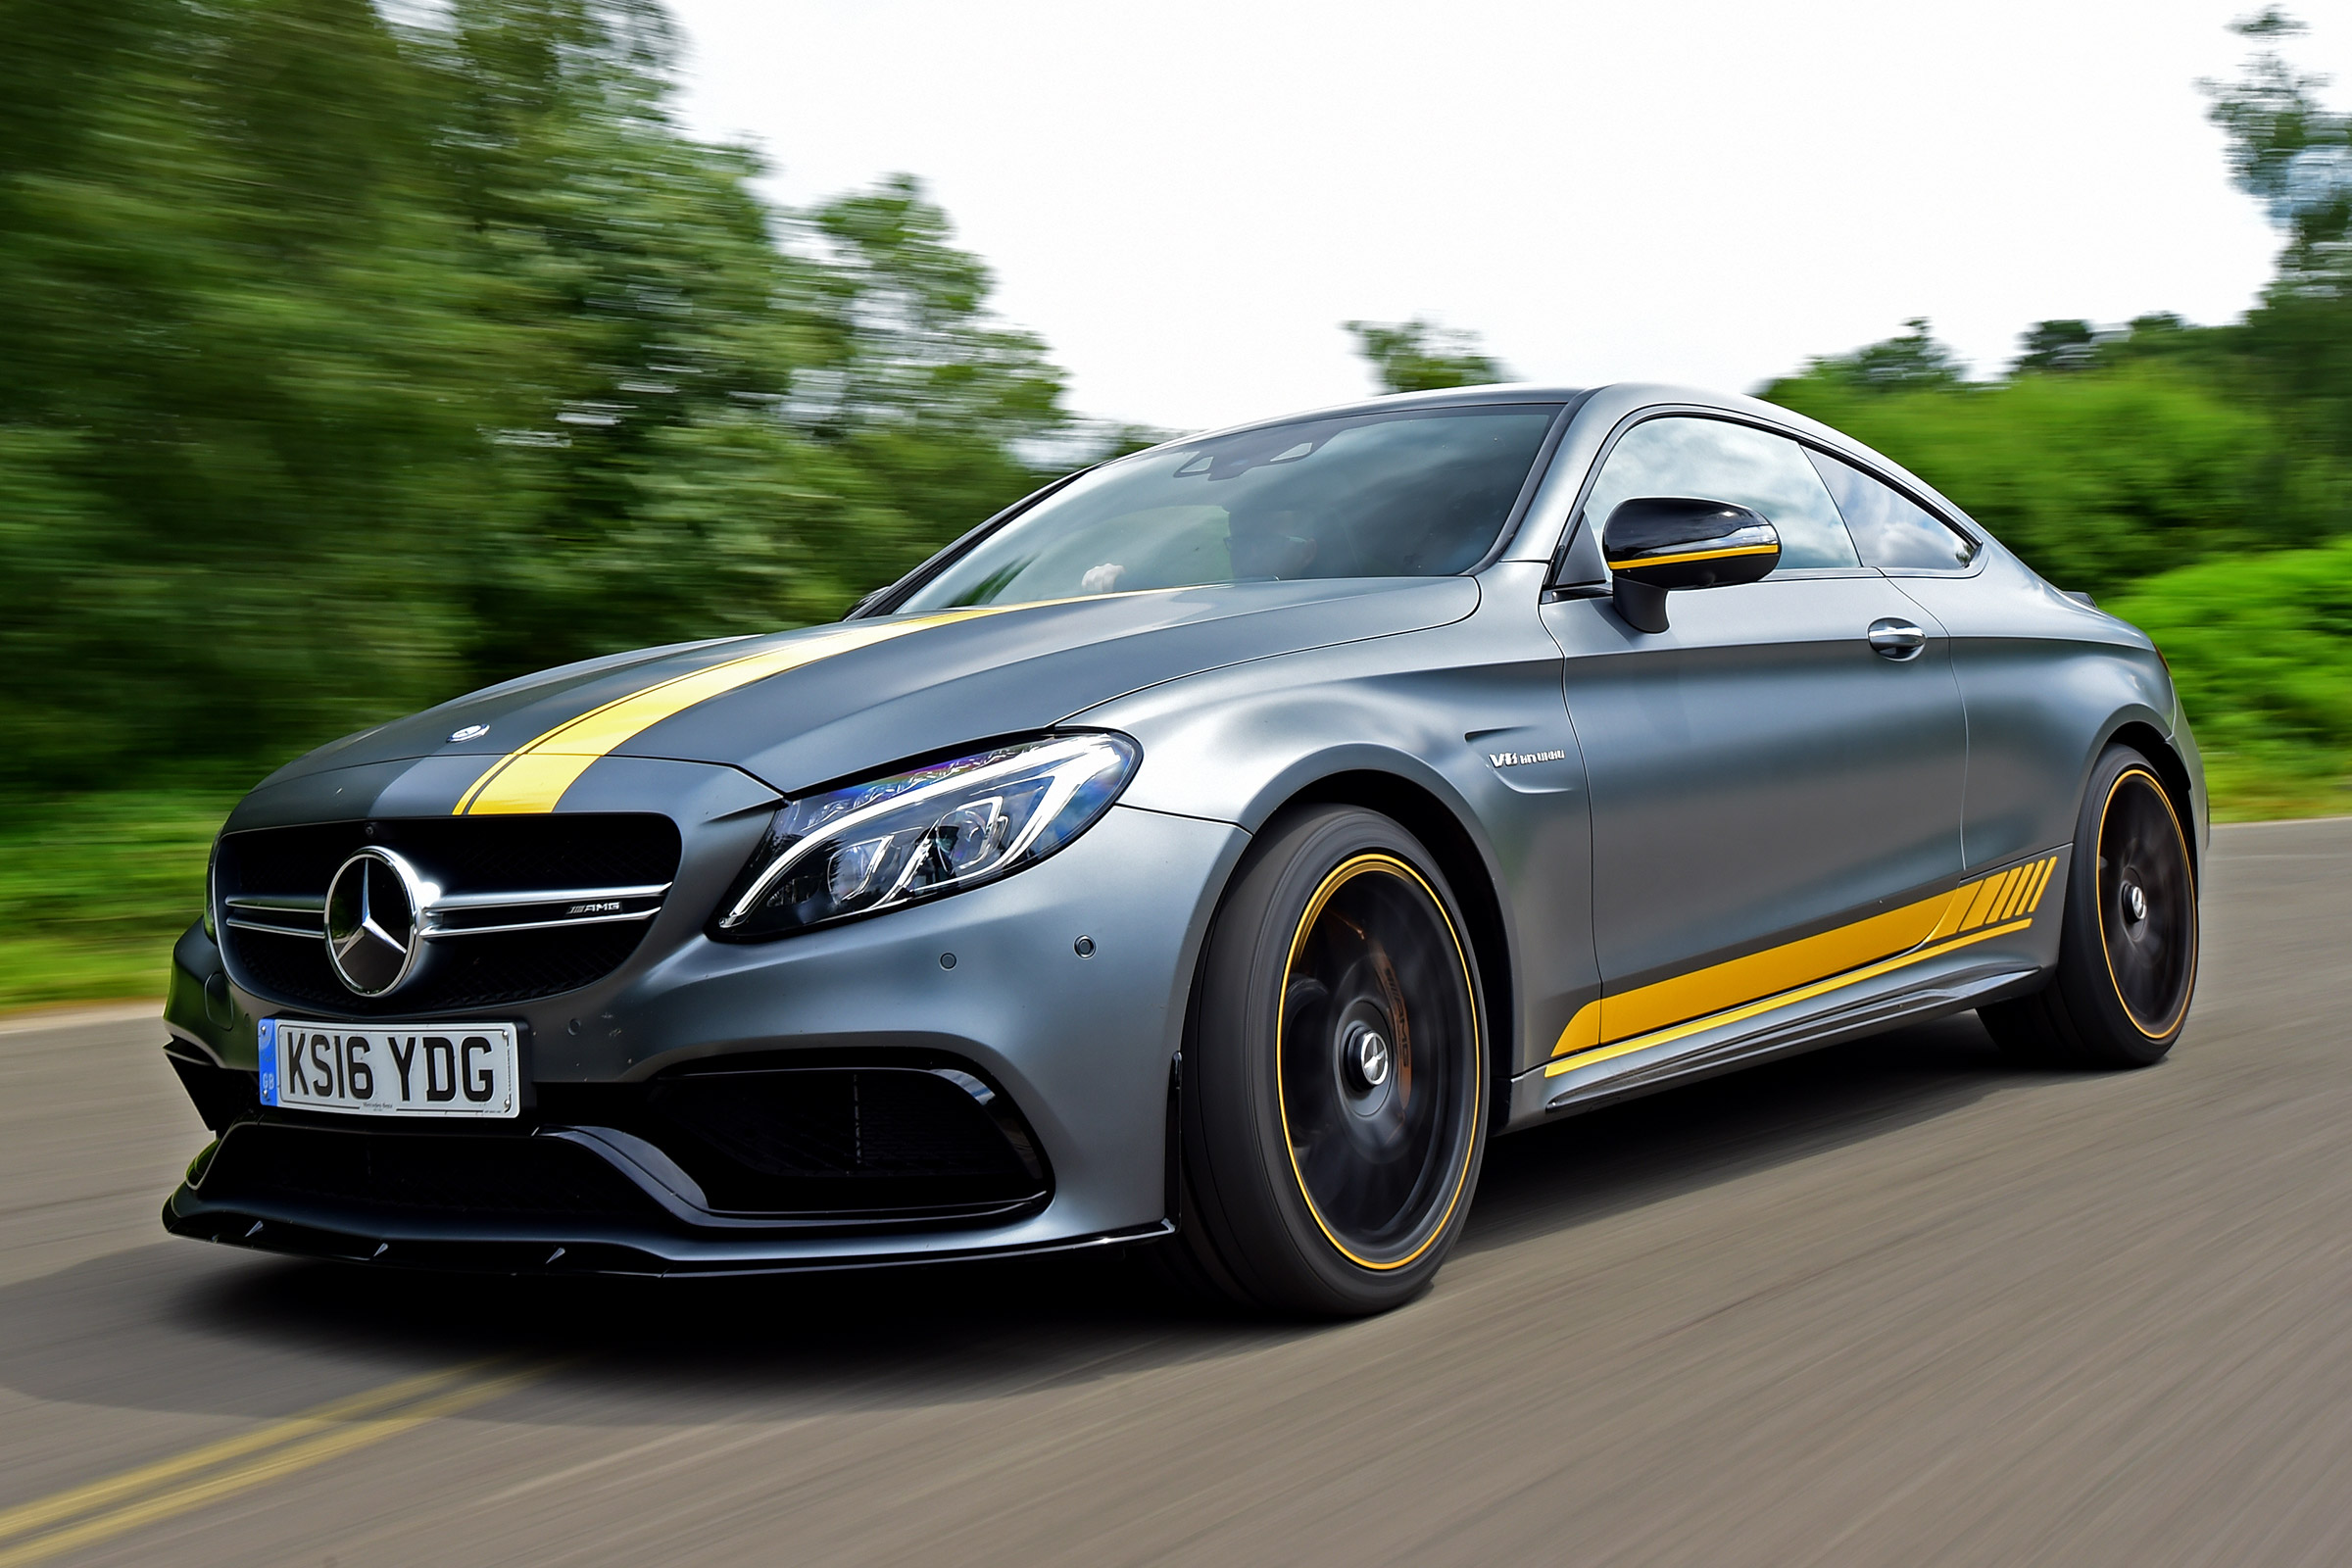 Mercedes-AMG C63 Coupe - best sports cars | Auto Express